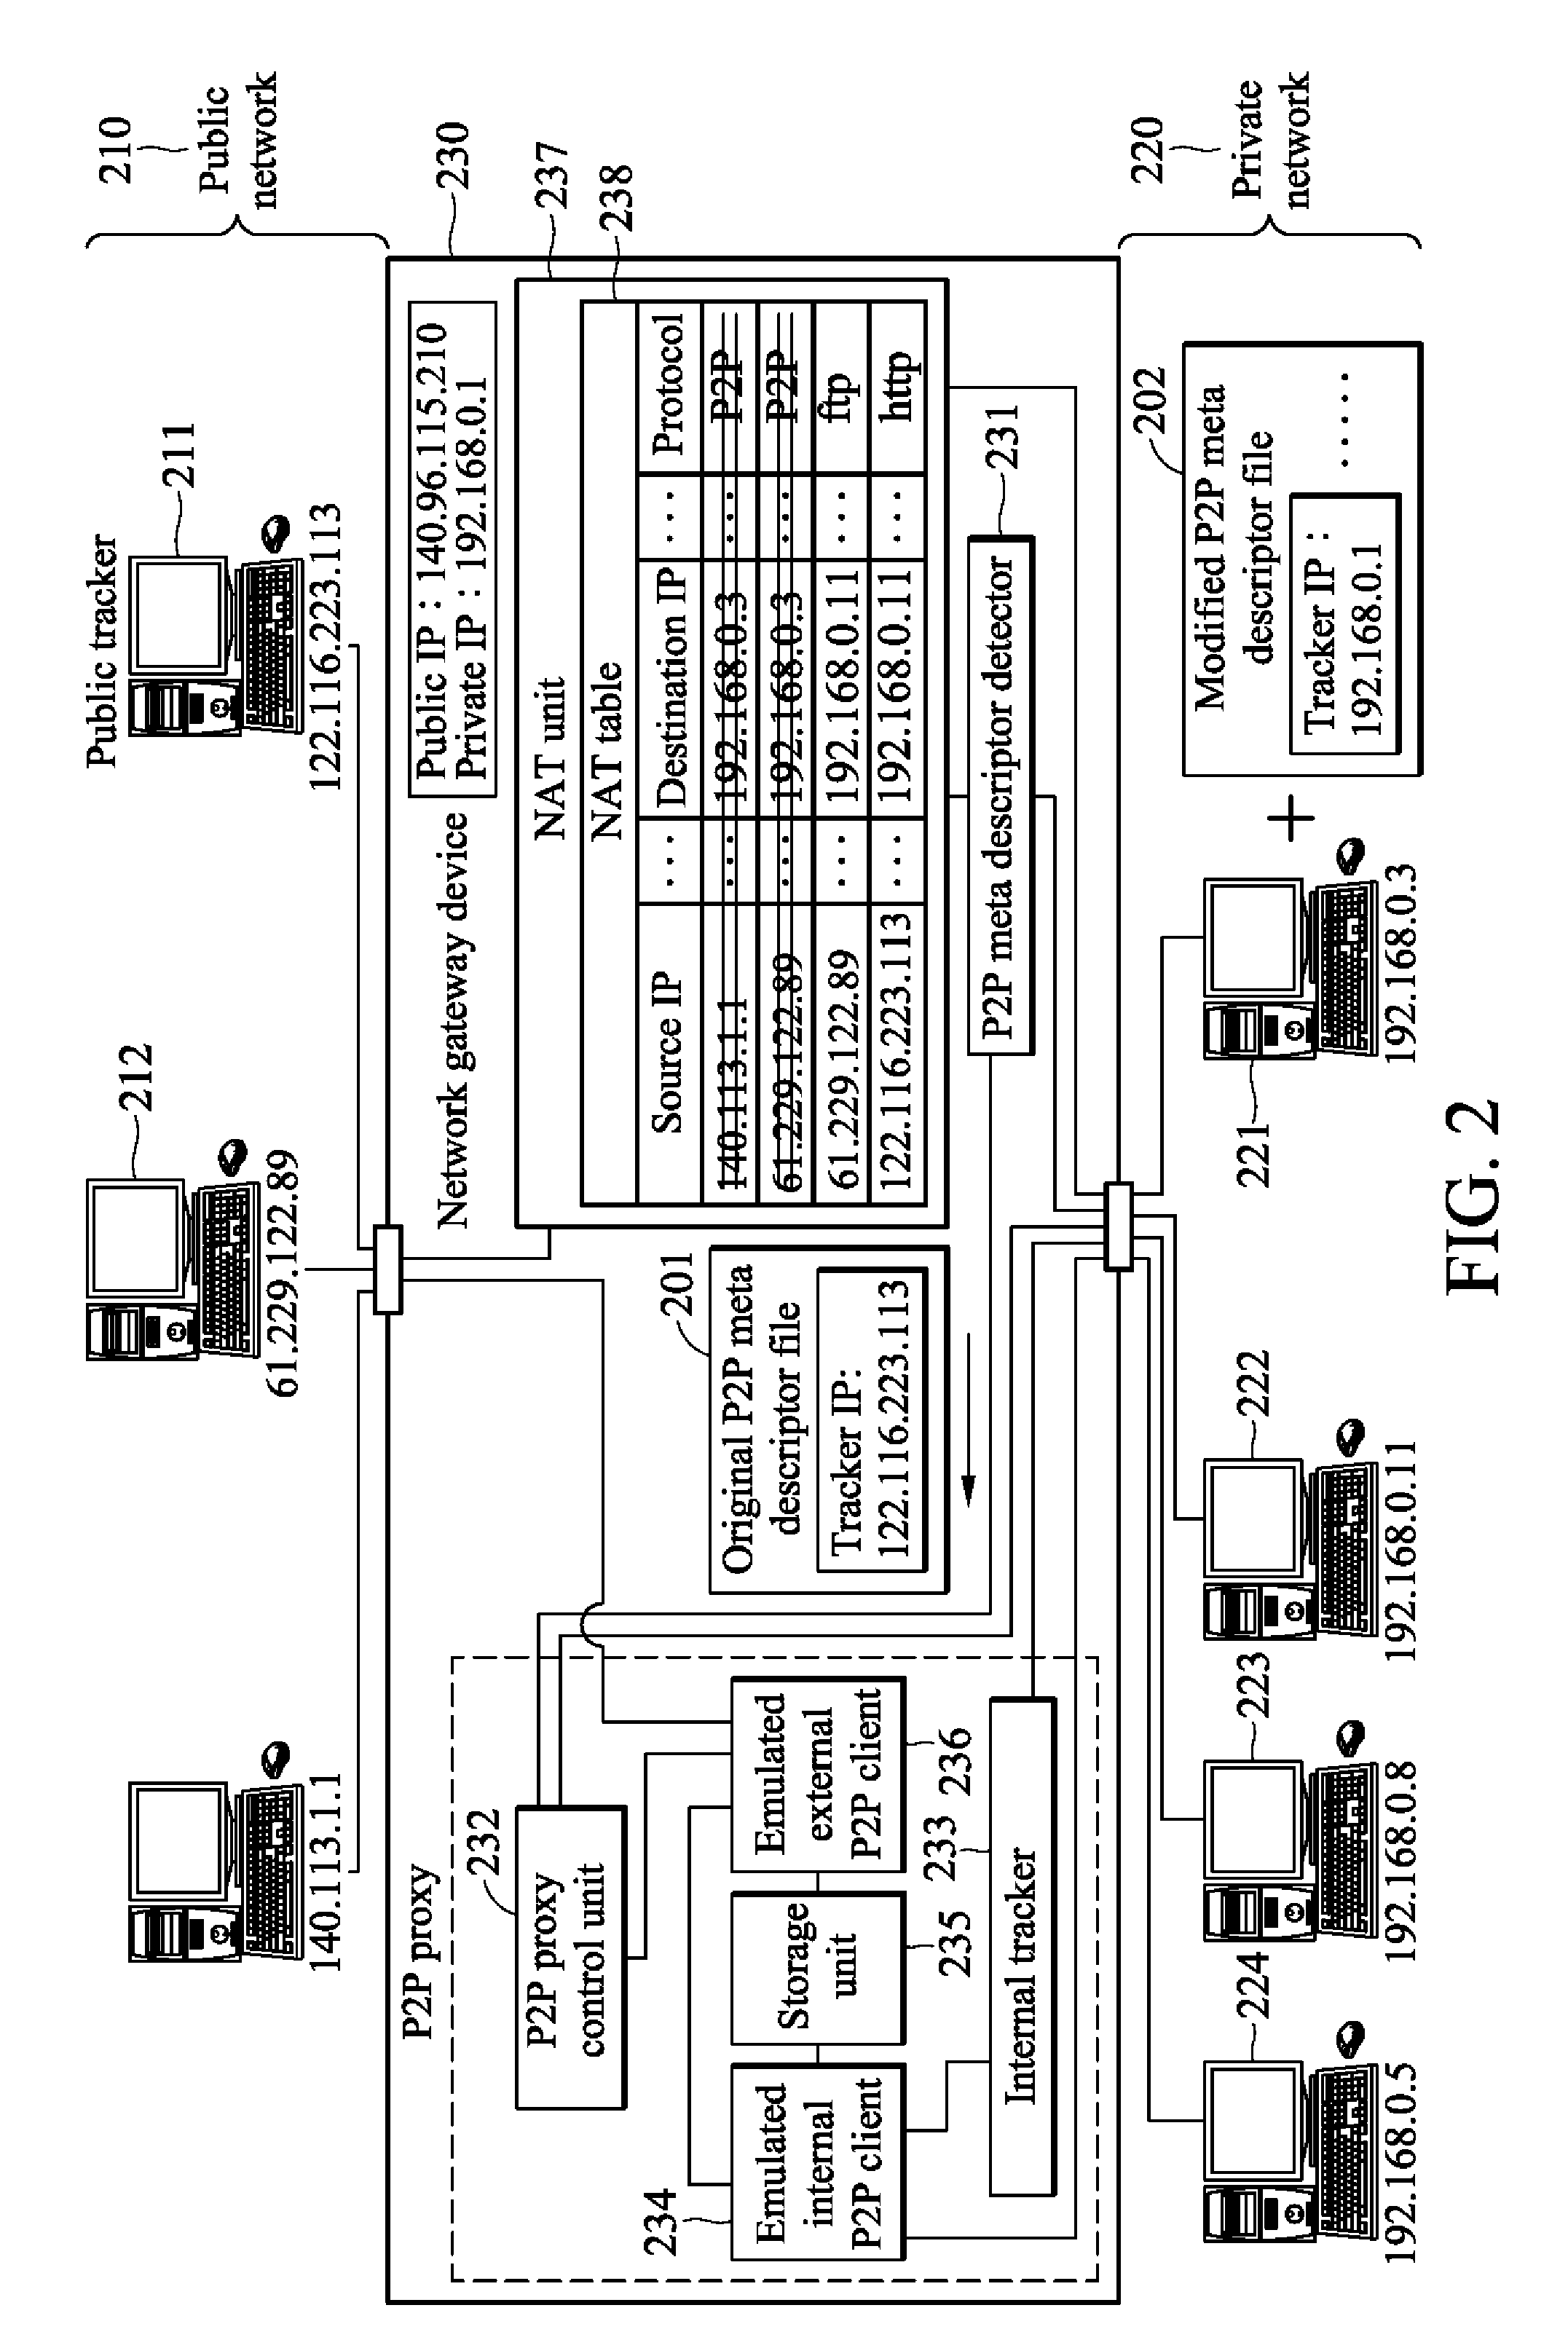 Apparatus and method for providing peer-to-peer proxy service with temporary storage management and traffic load balancing in peer-to-peer communications